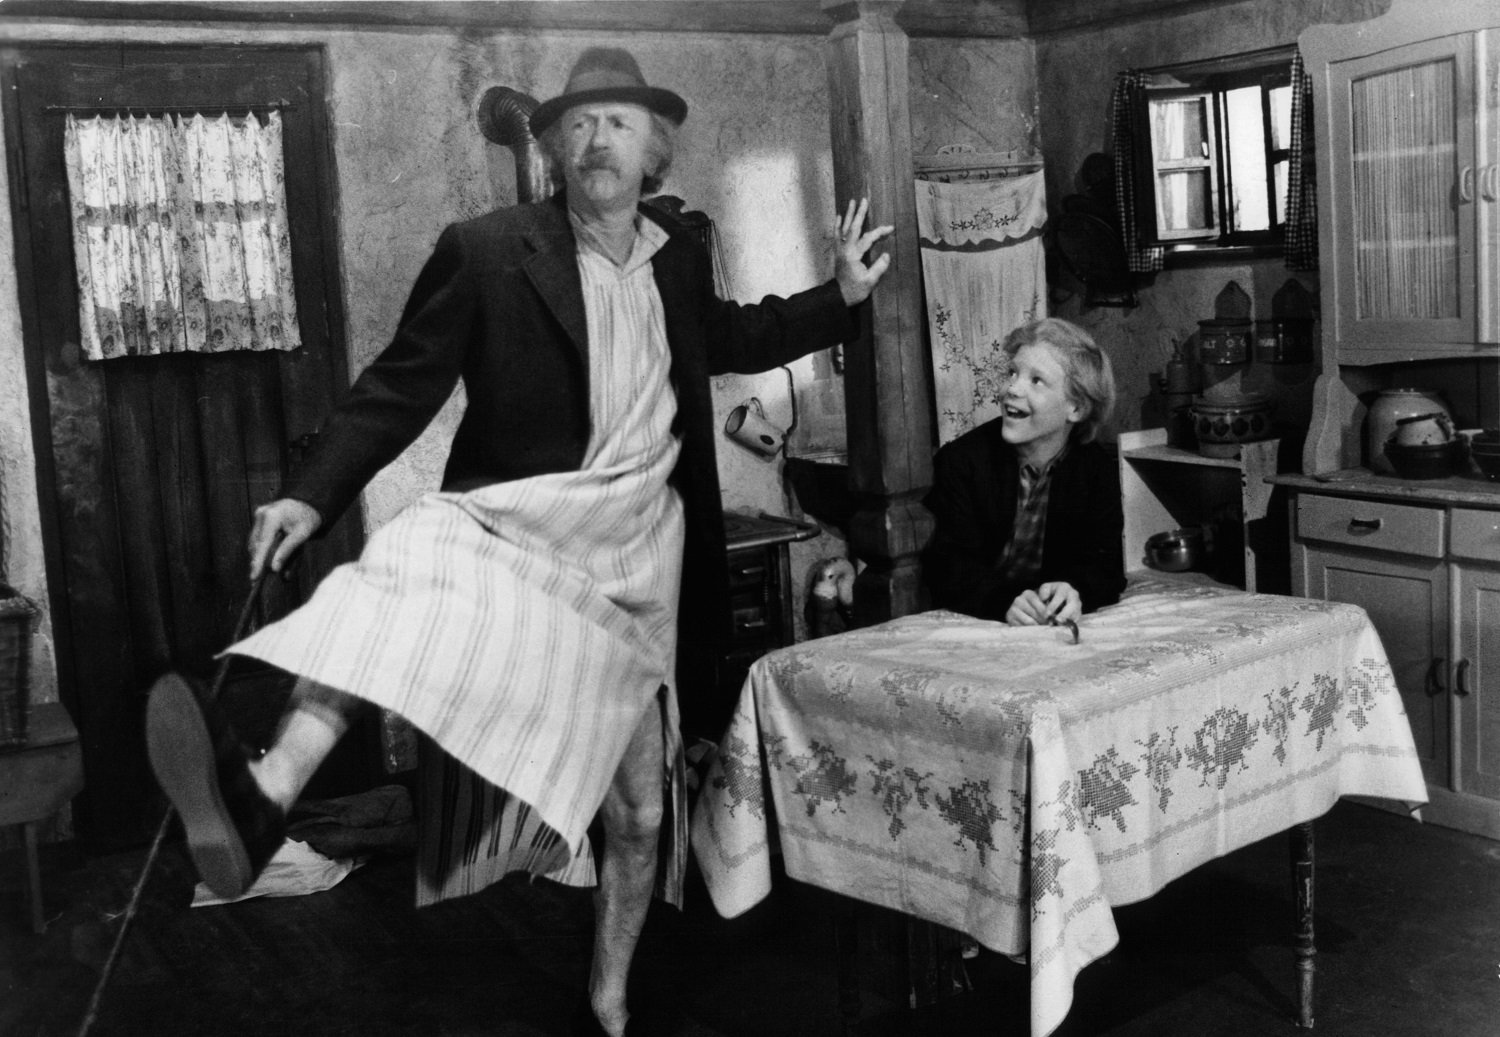 Jack Albertson dancing in front of Peter Ostrum in a scene from the film 'Willy Wonka & the Chocolate Factory'